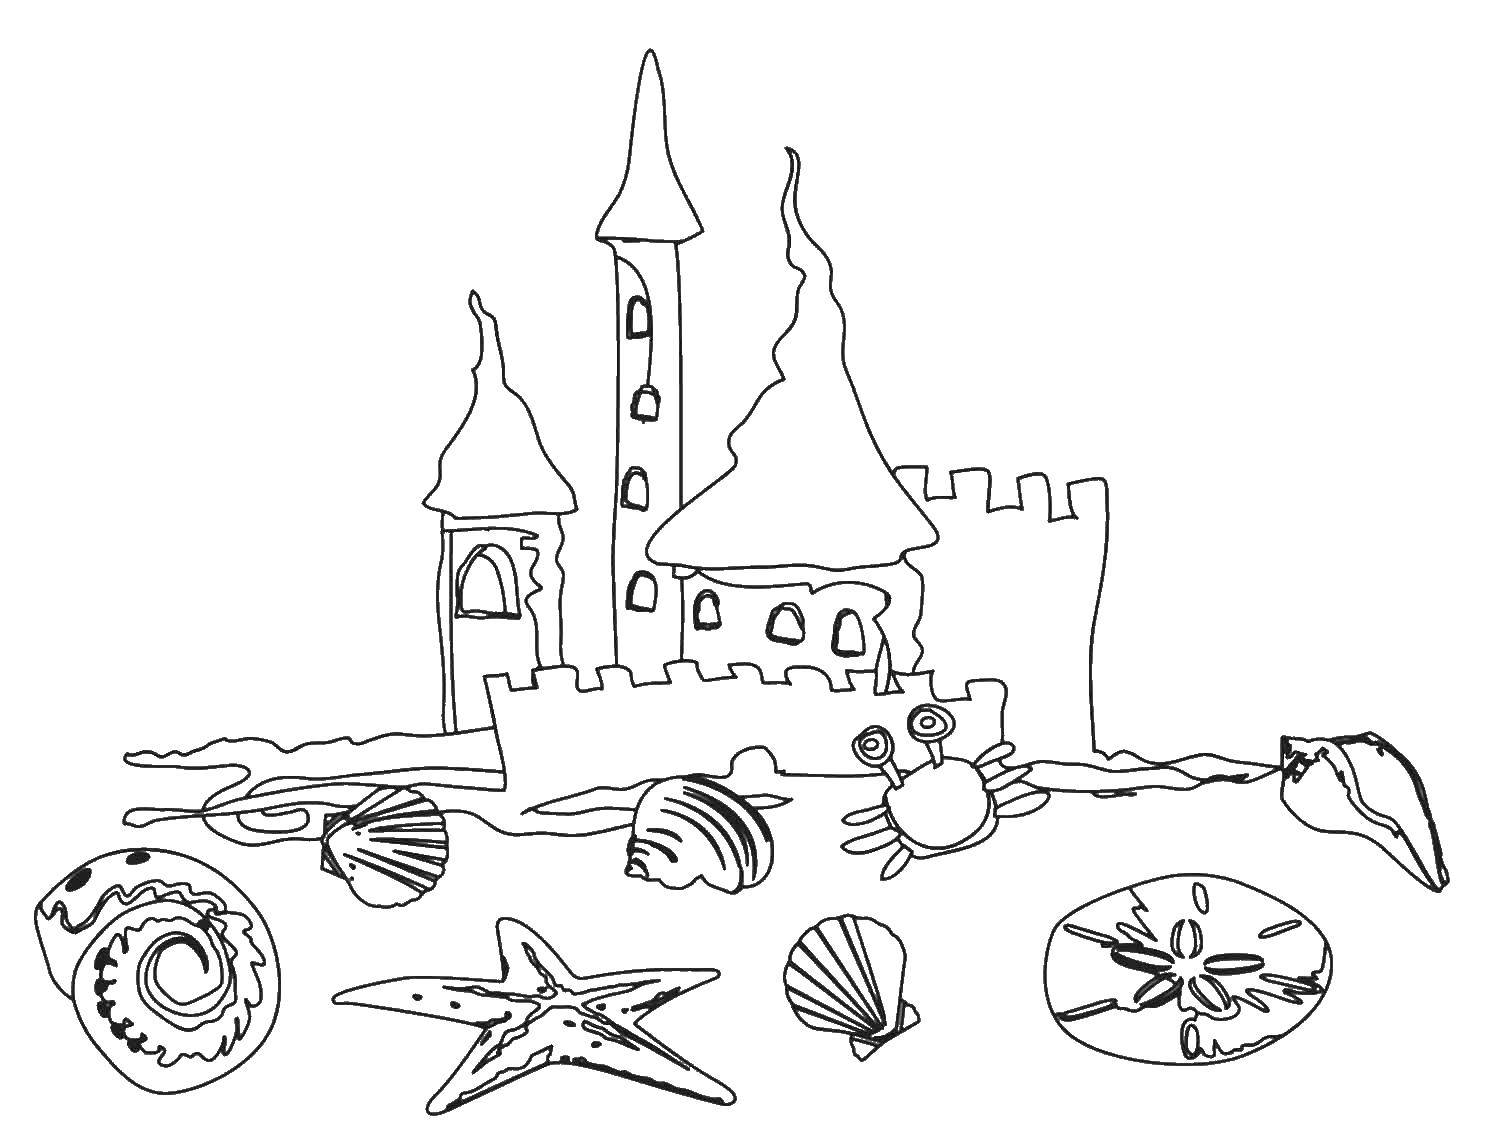 Coloring Sand castle and seashells. Category Summer fun. Tags:  castle, sand, shells.